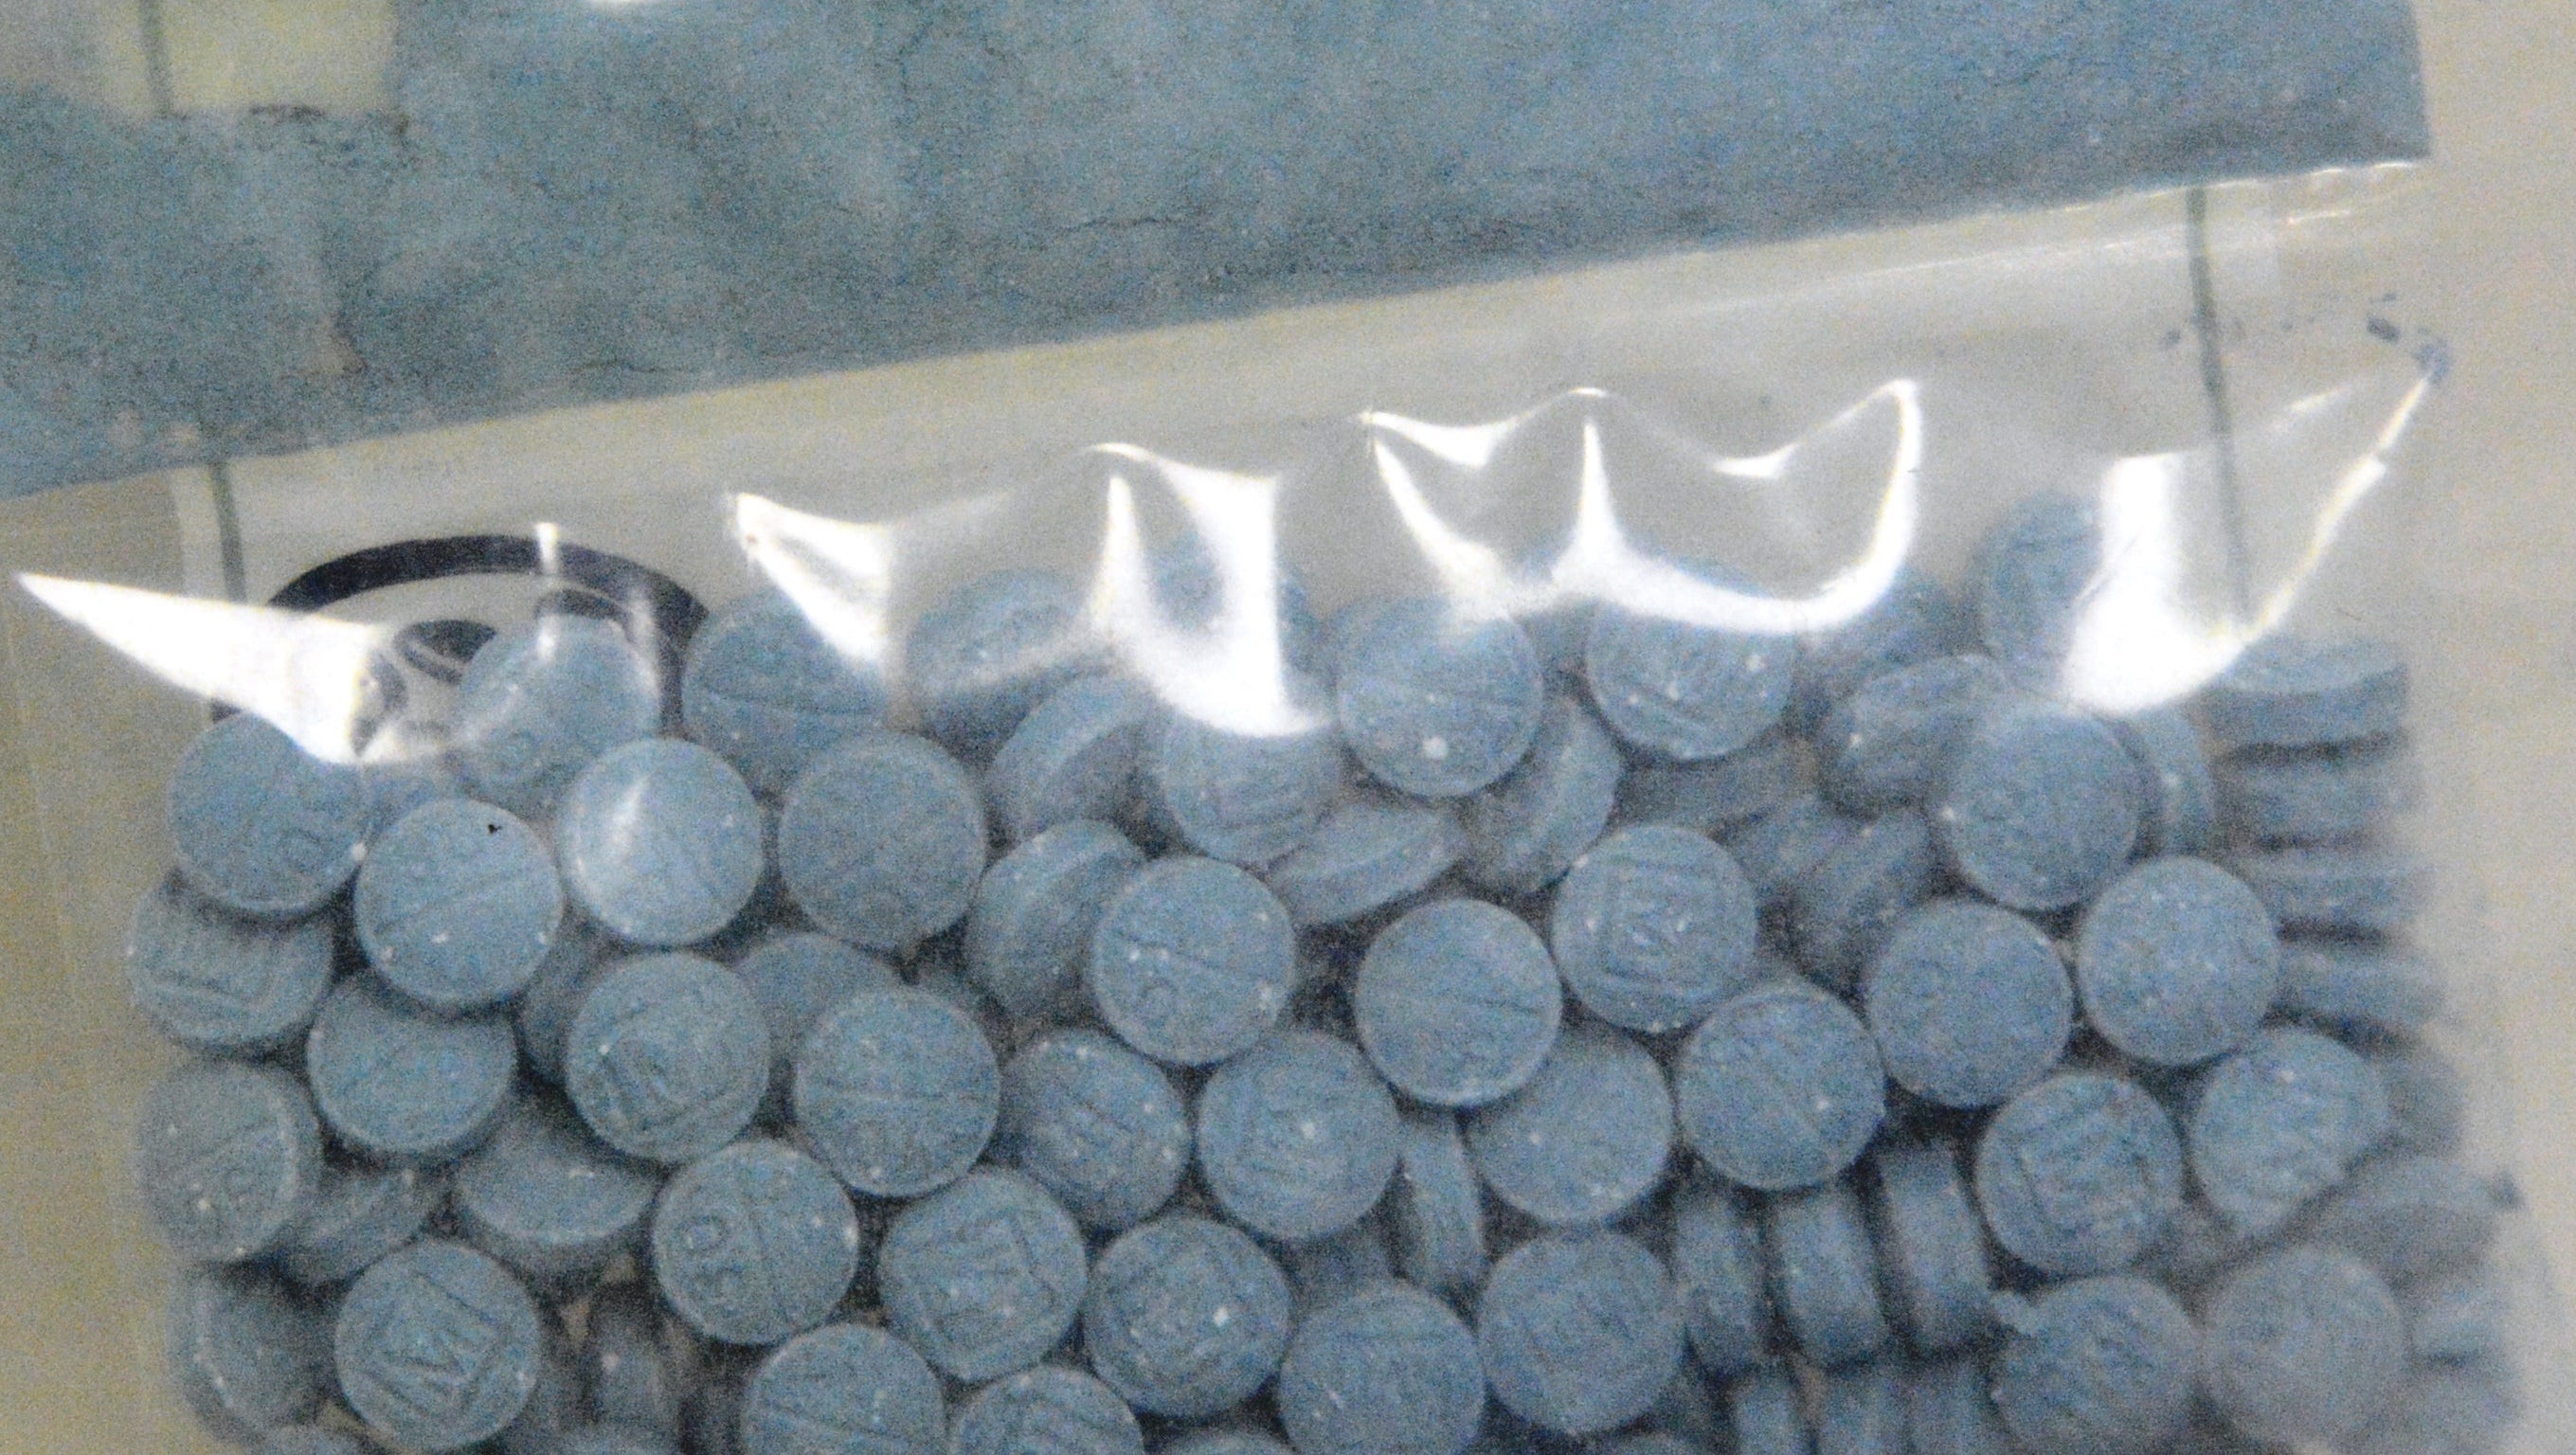 5 things to know about trendy street drug fentanyl